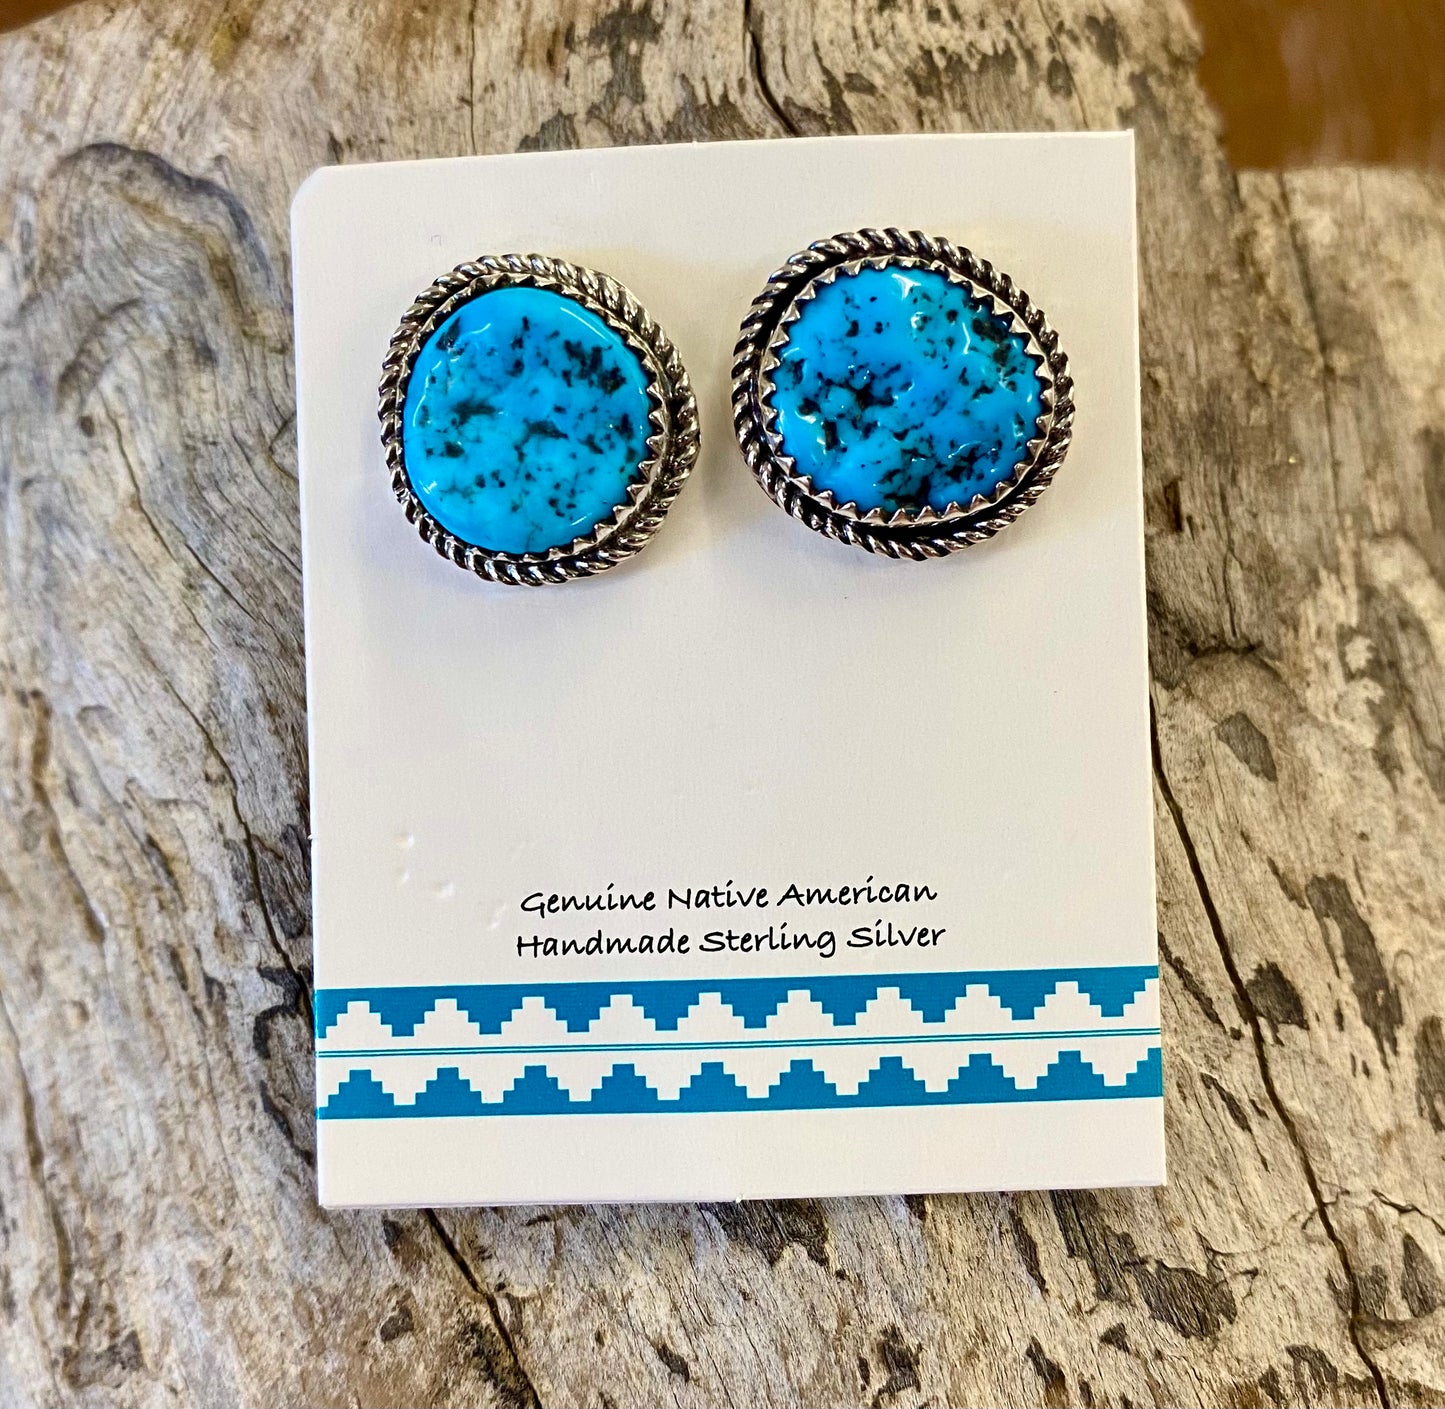 Sterling Silver Post Stud Turquoise Native American Made Earrings Beautiful unique sterling silver Native made Kingman Turquoise stud earrings stamped sterling. These 1/2 inch post earrings are the perfect everyday casual to dress up earrings. A soon to be favorite in anyone's jewelry collection. Size: 1/2 inch Stone: Kingman Turquoise. Silver Turquoise Earrings, Post Stud Earrings